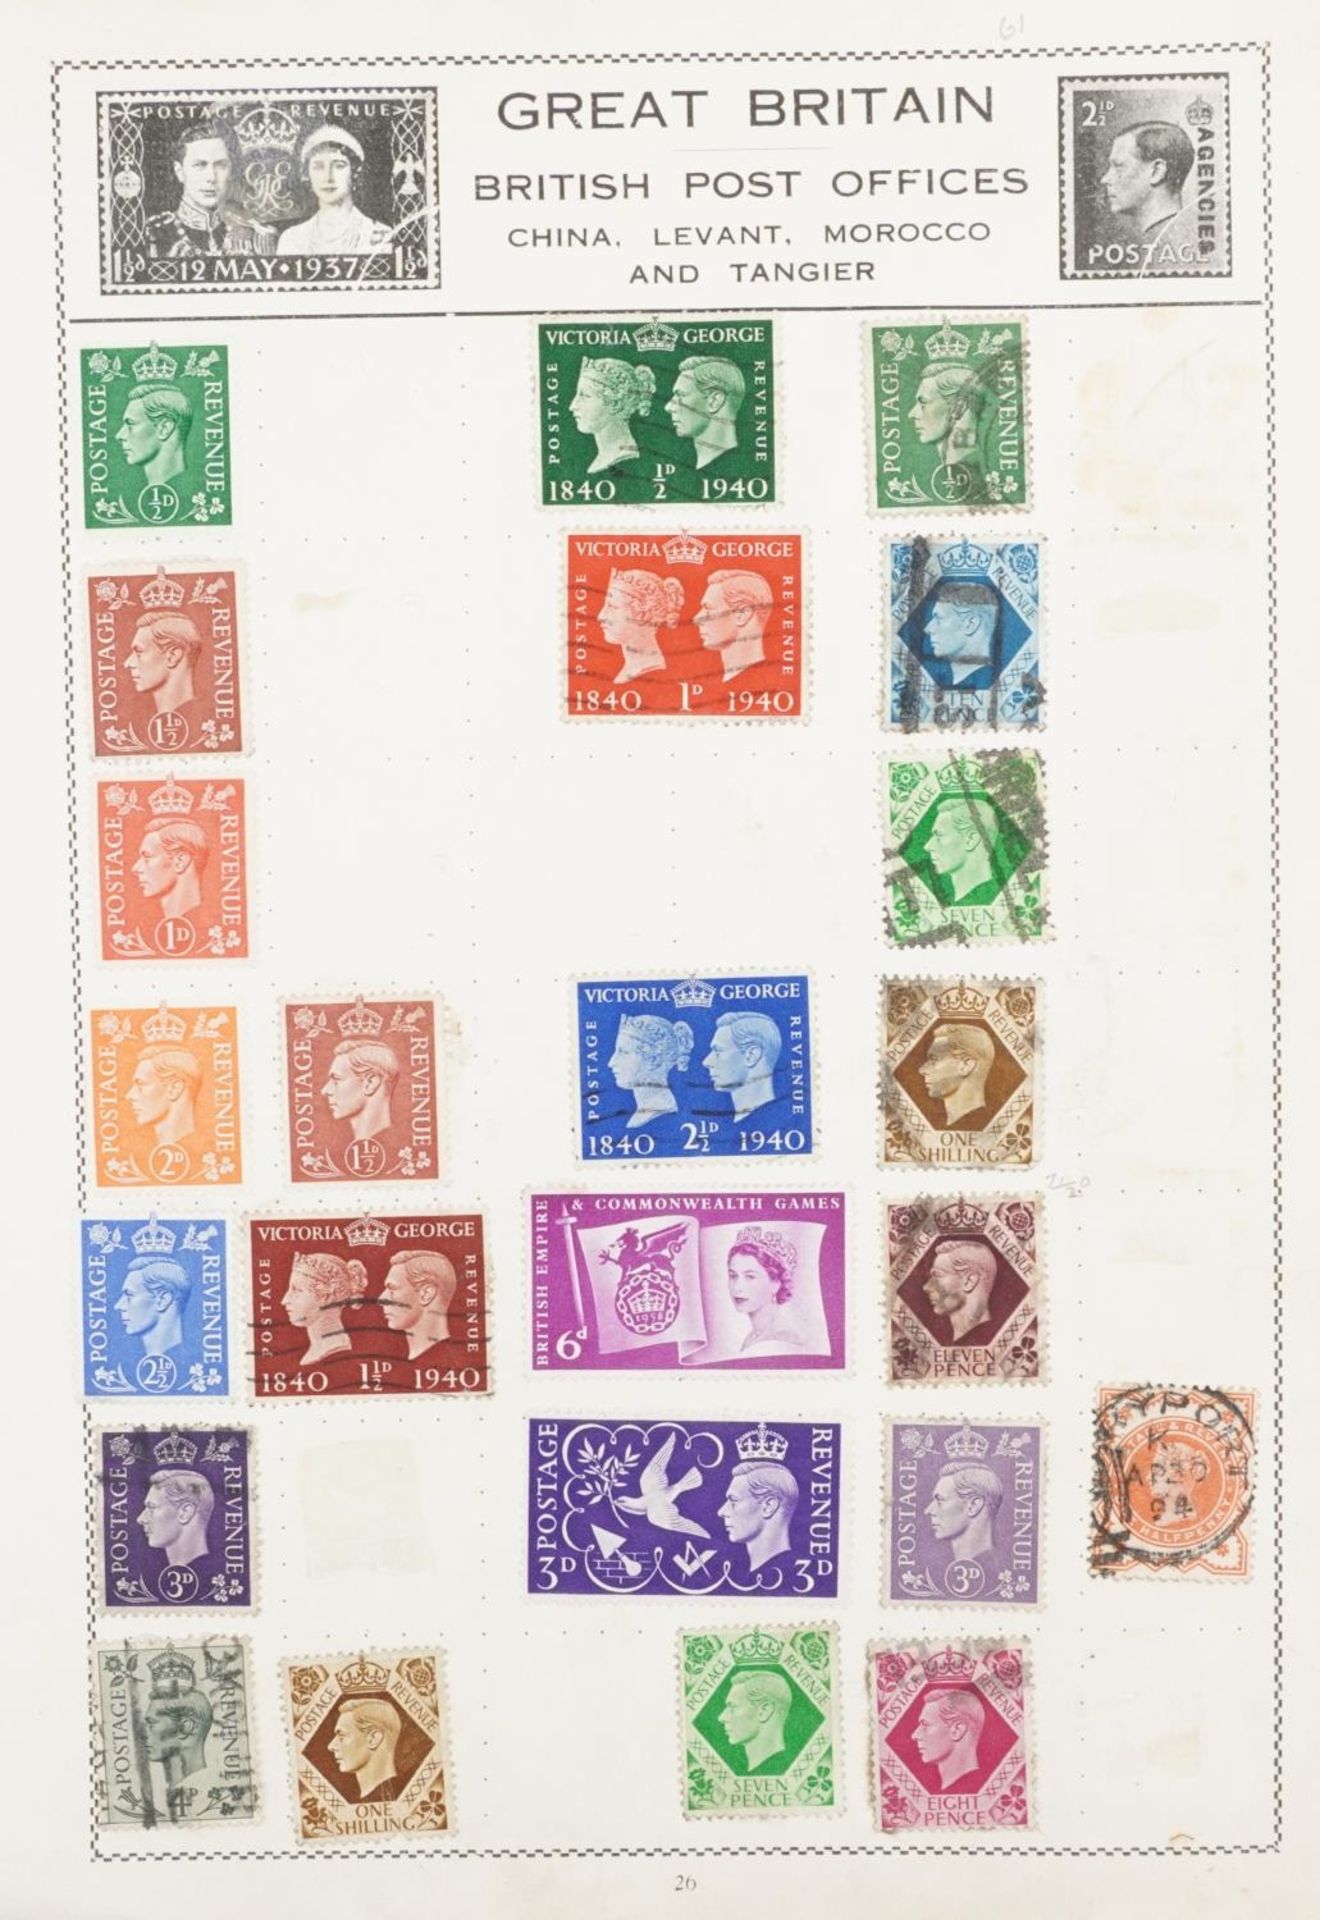 Extensive collection of British and world stamps, covers and postal history, some arranged on sheets - Image 9 of 9